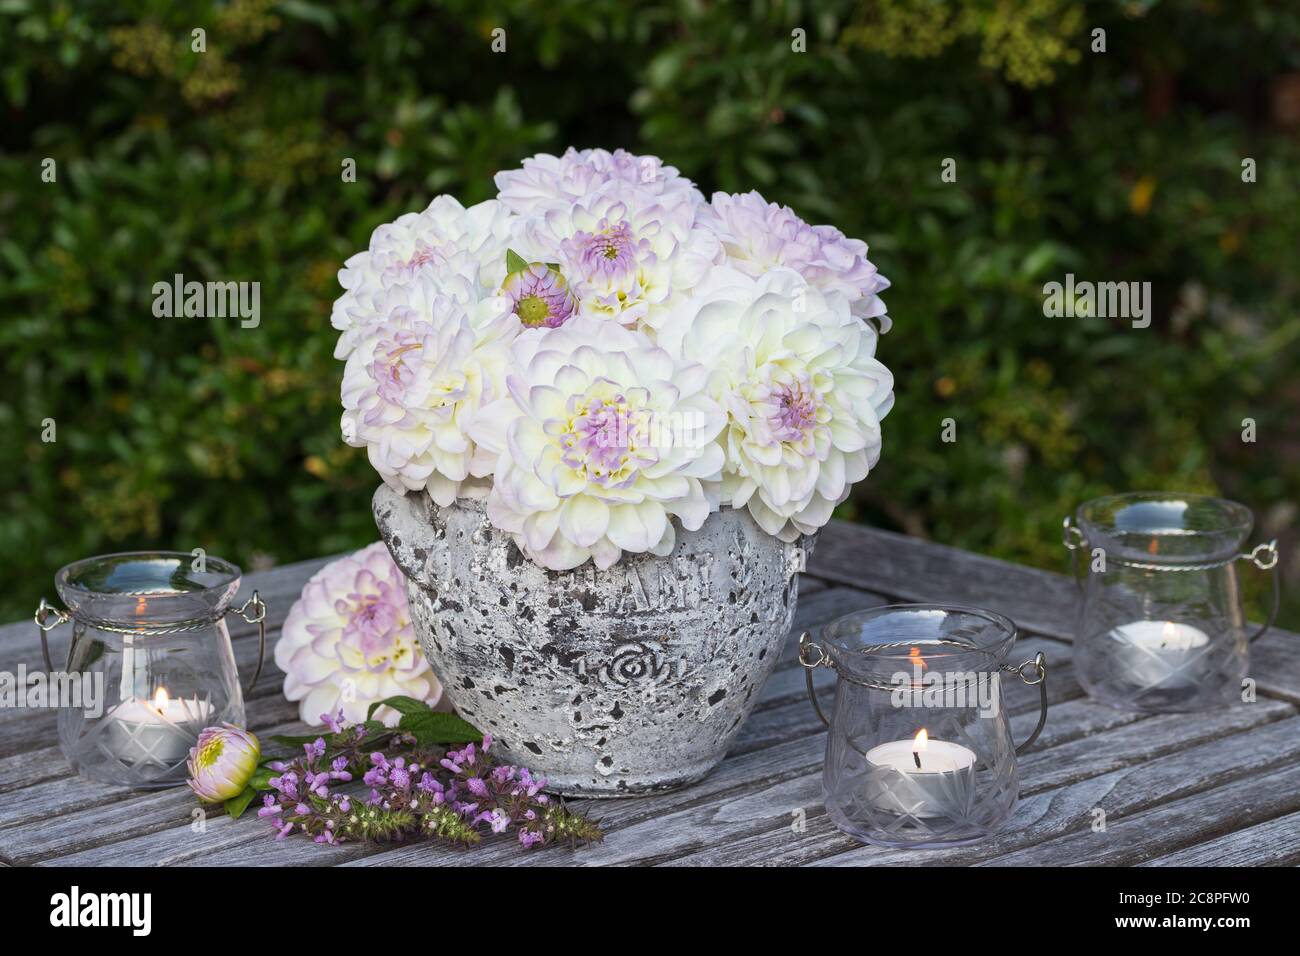 bouquet of white and purple dahlias and table lanterns as romantic decoration Stock Photo